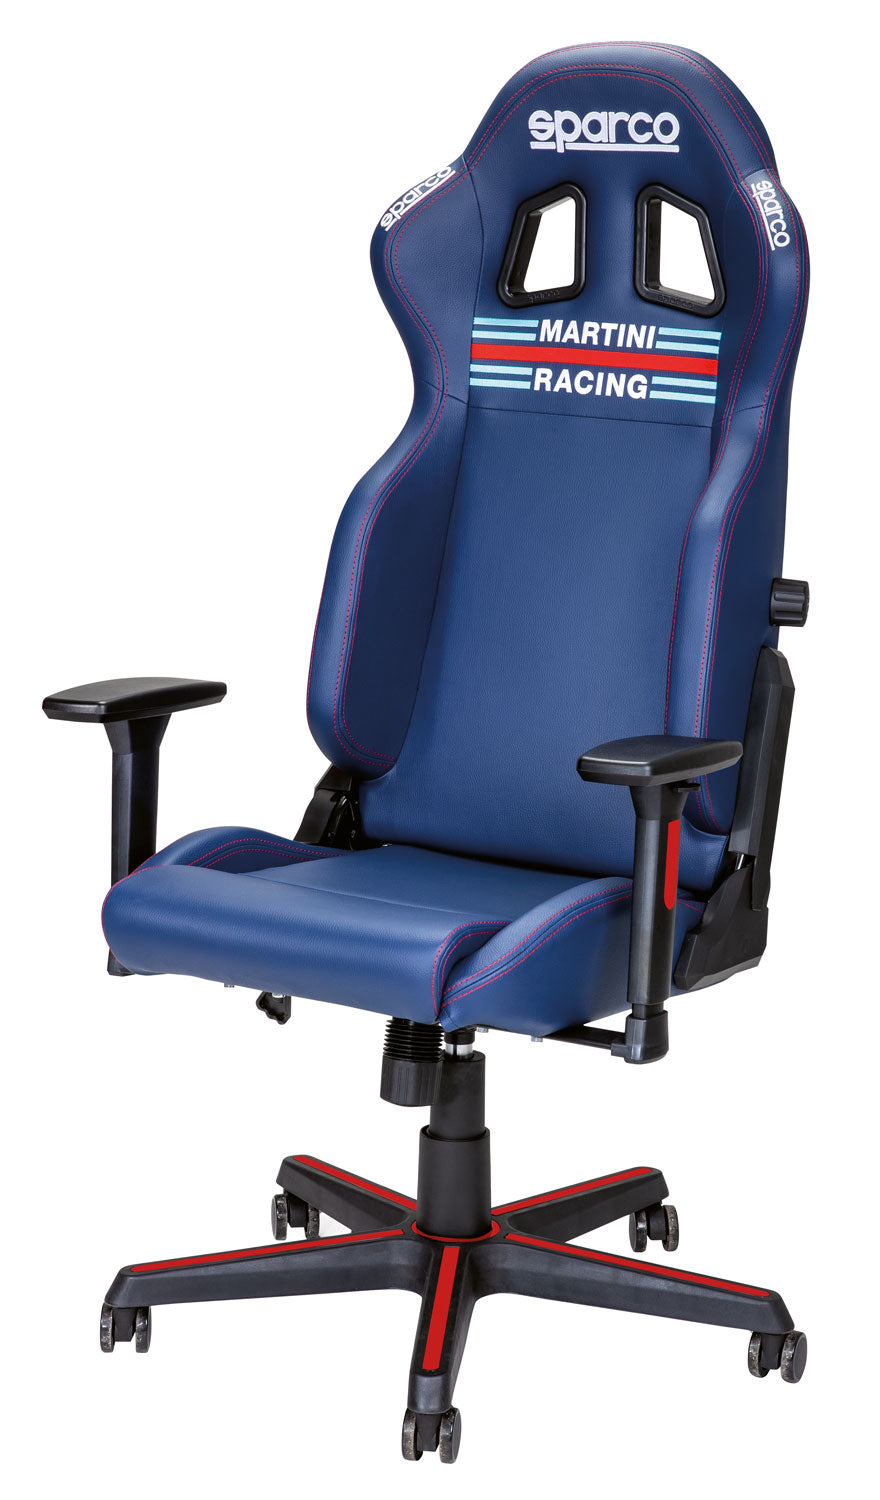 Sparco office chair Martini Racing